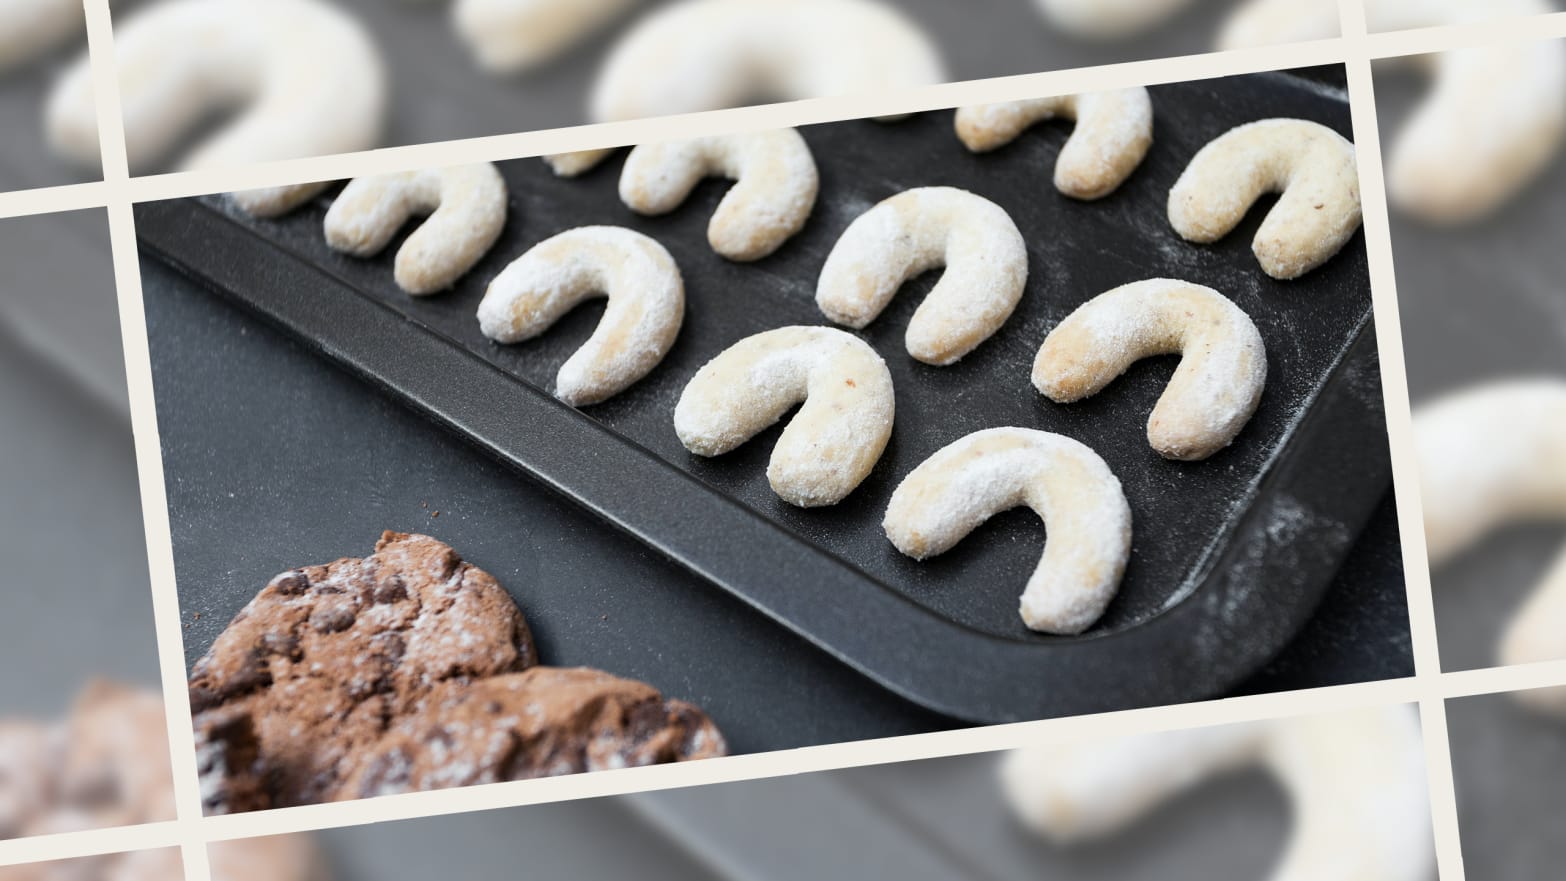 Best Baking Trays and Cookie Sheets